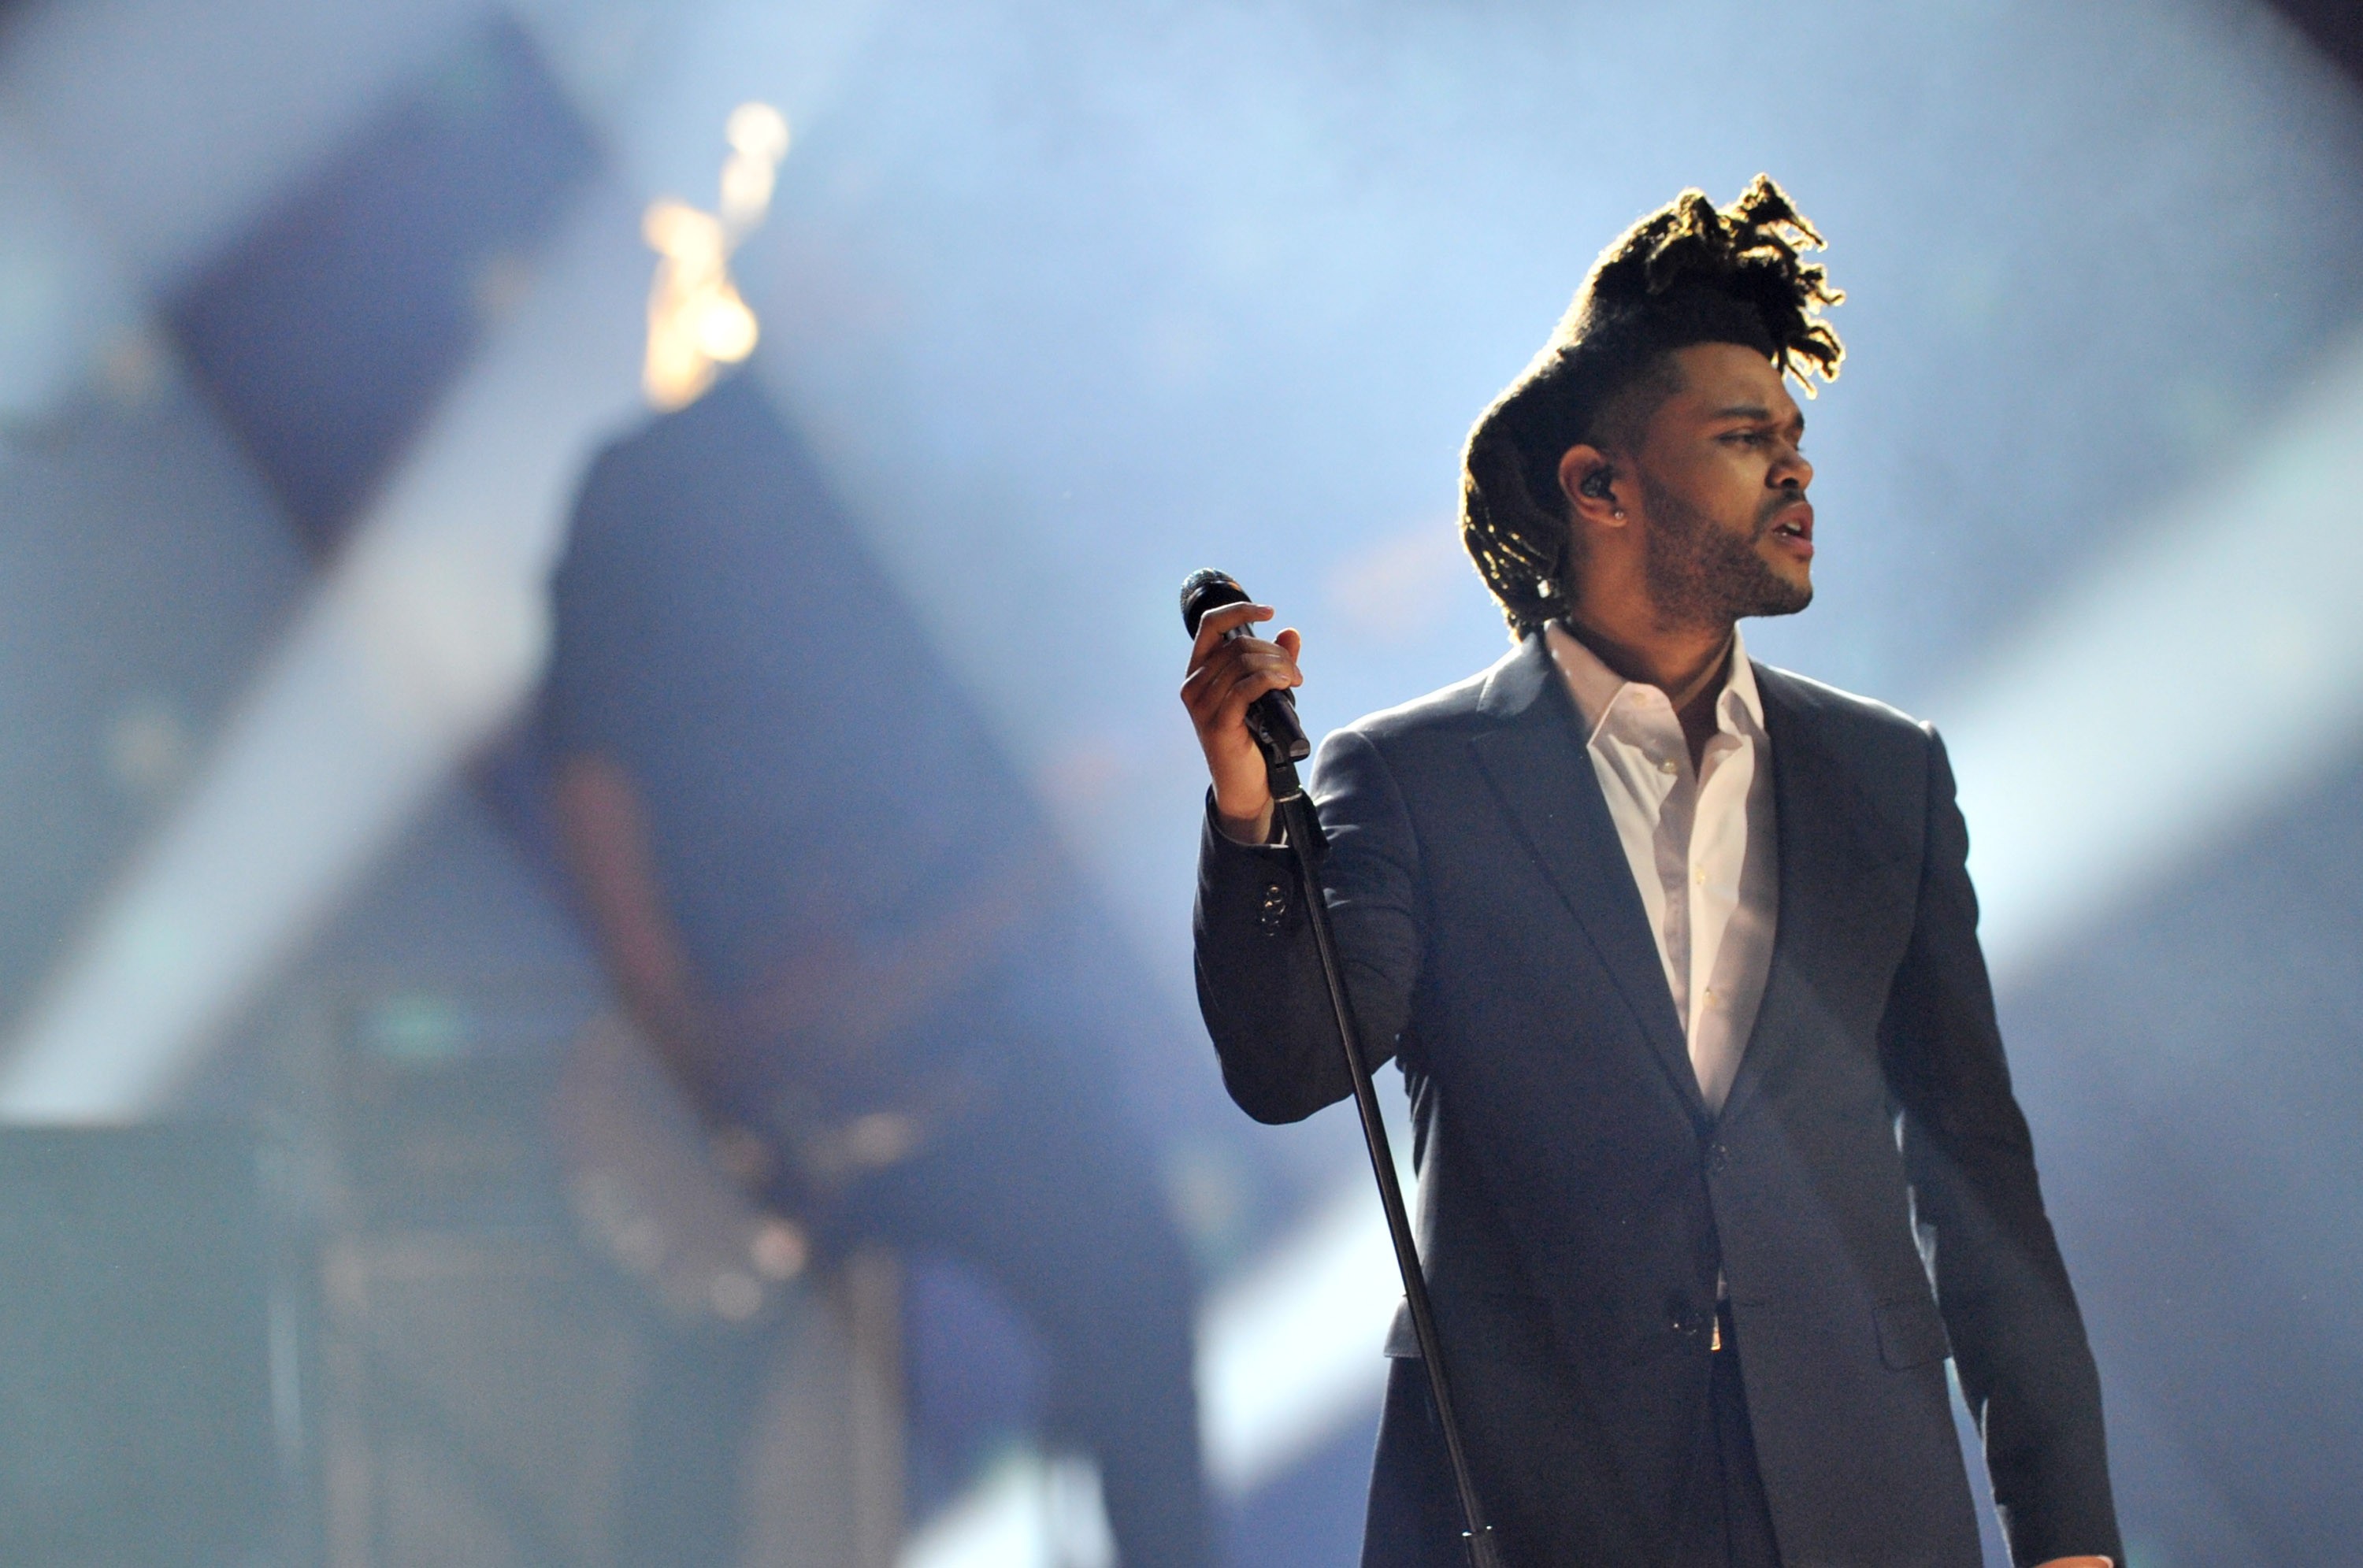 The Weeknd wallpaper ·① Download free stunning backgrounds ...